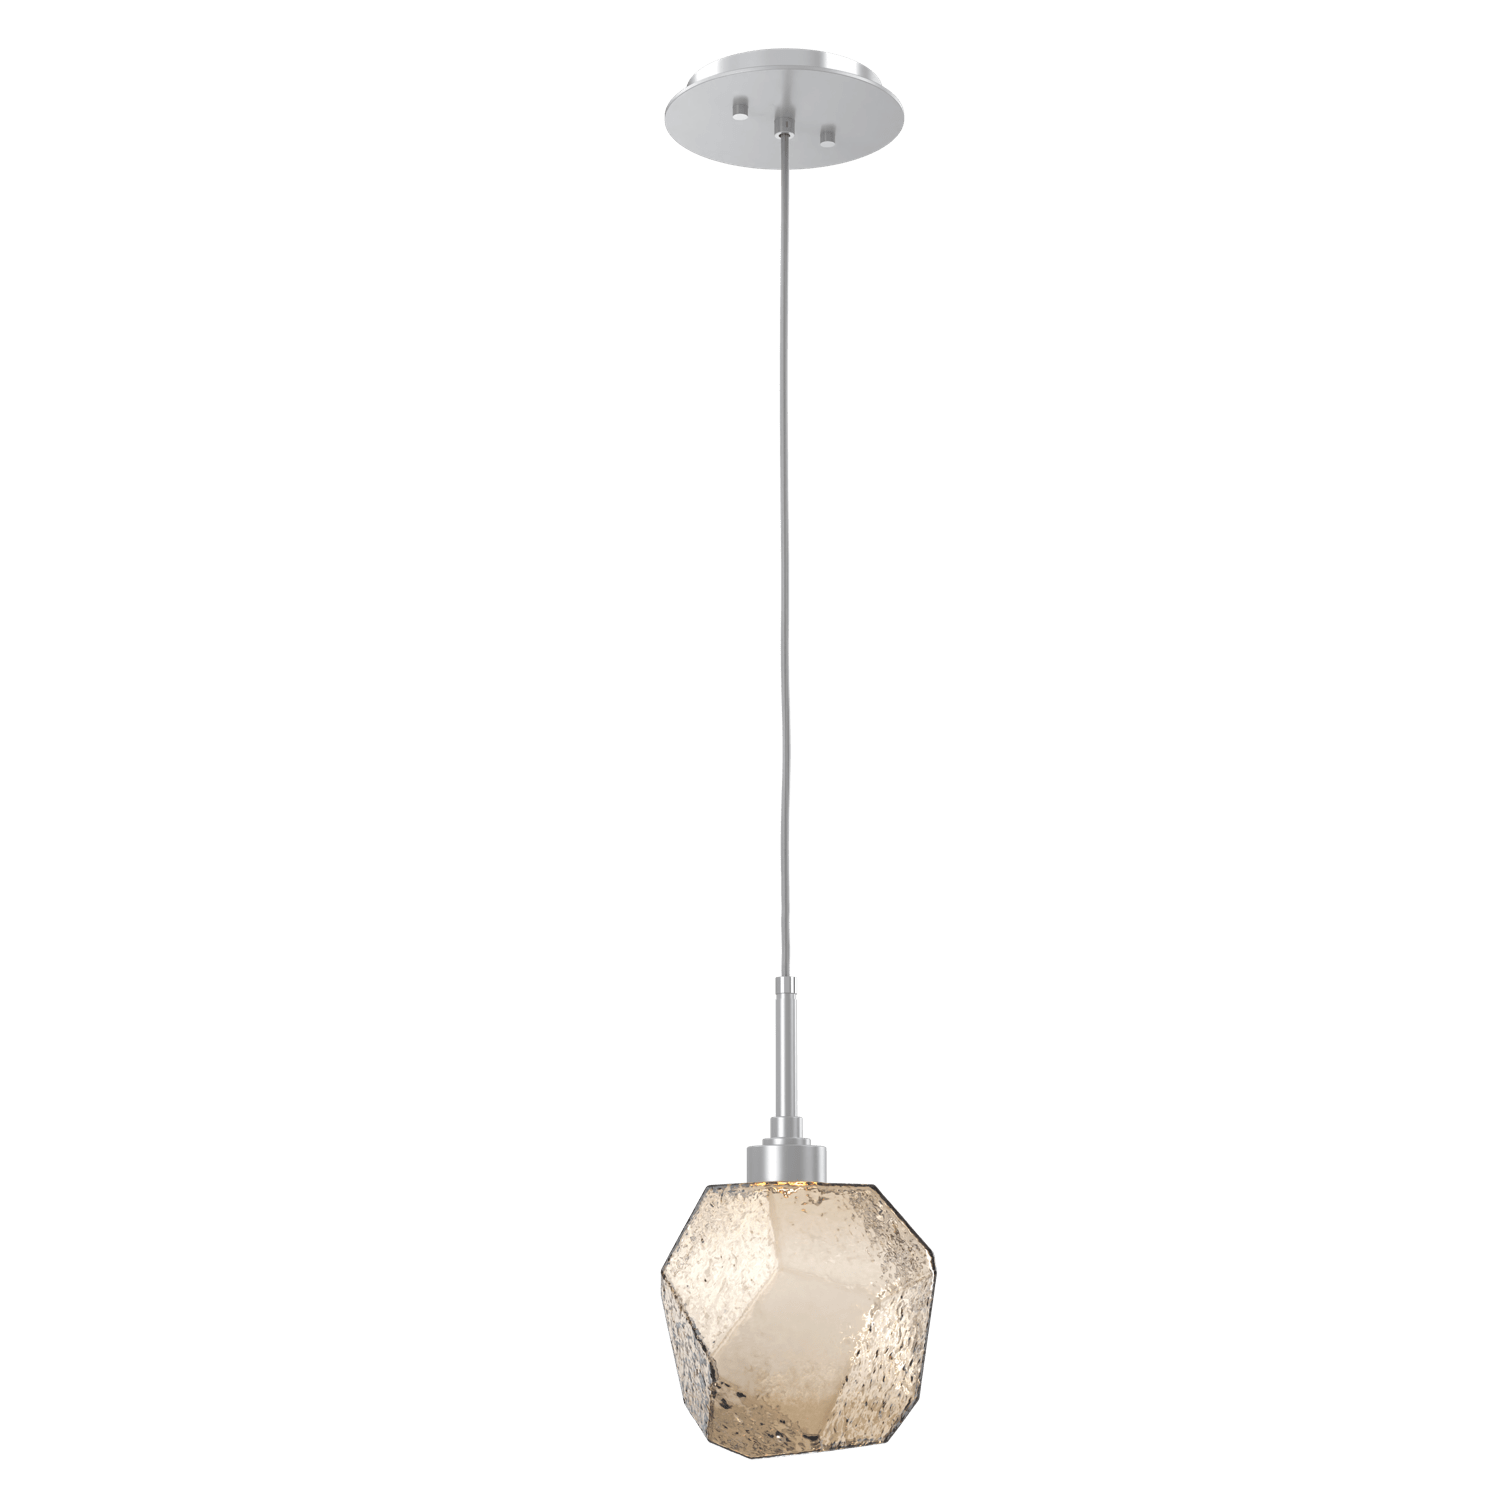 LAB0039-01-CS-B-Hammerton-Studio-Gem-pendant-light-with-classic-silver-finish-and-bronze-blown-glass-shades-and-LED-lamping